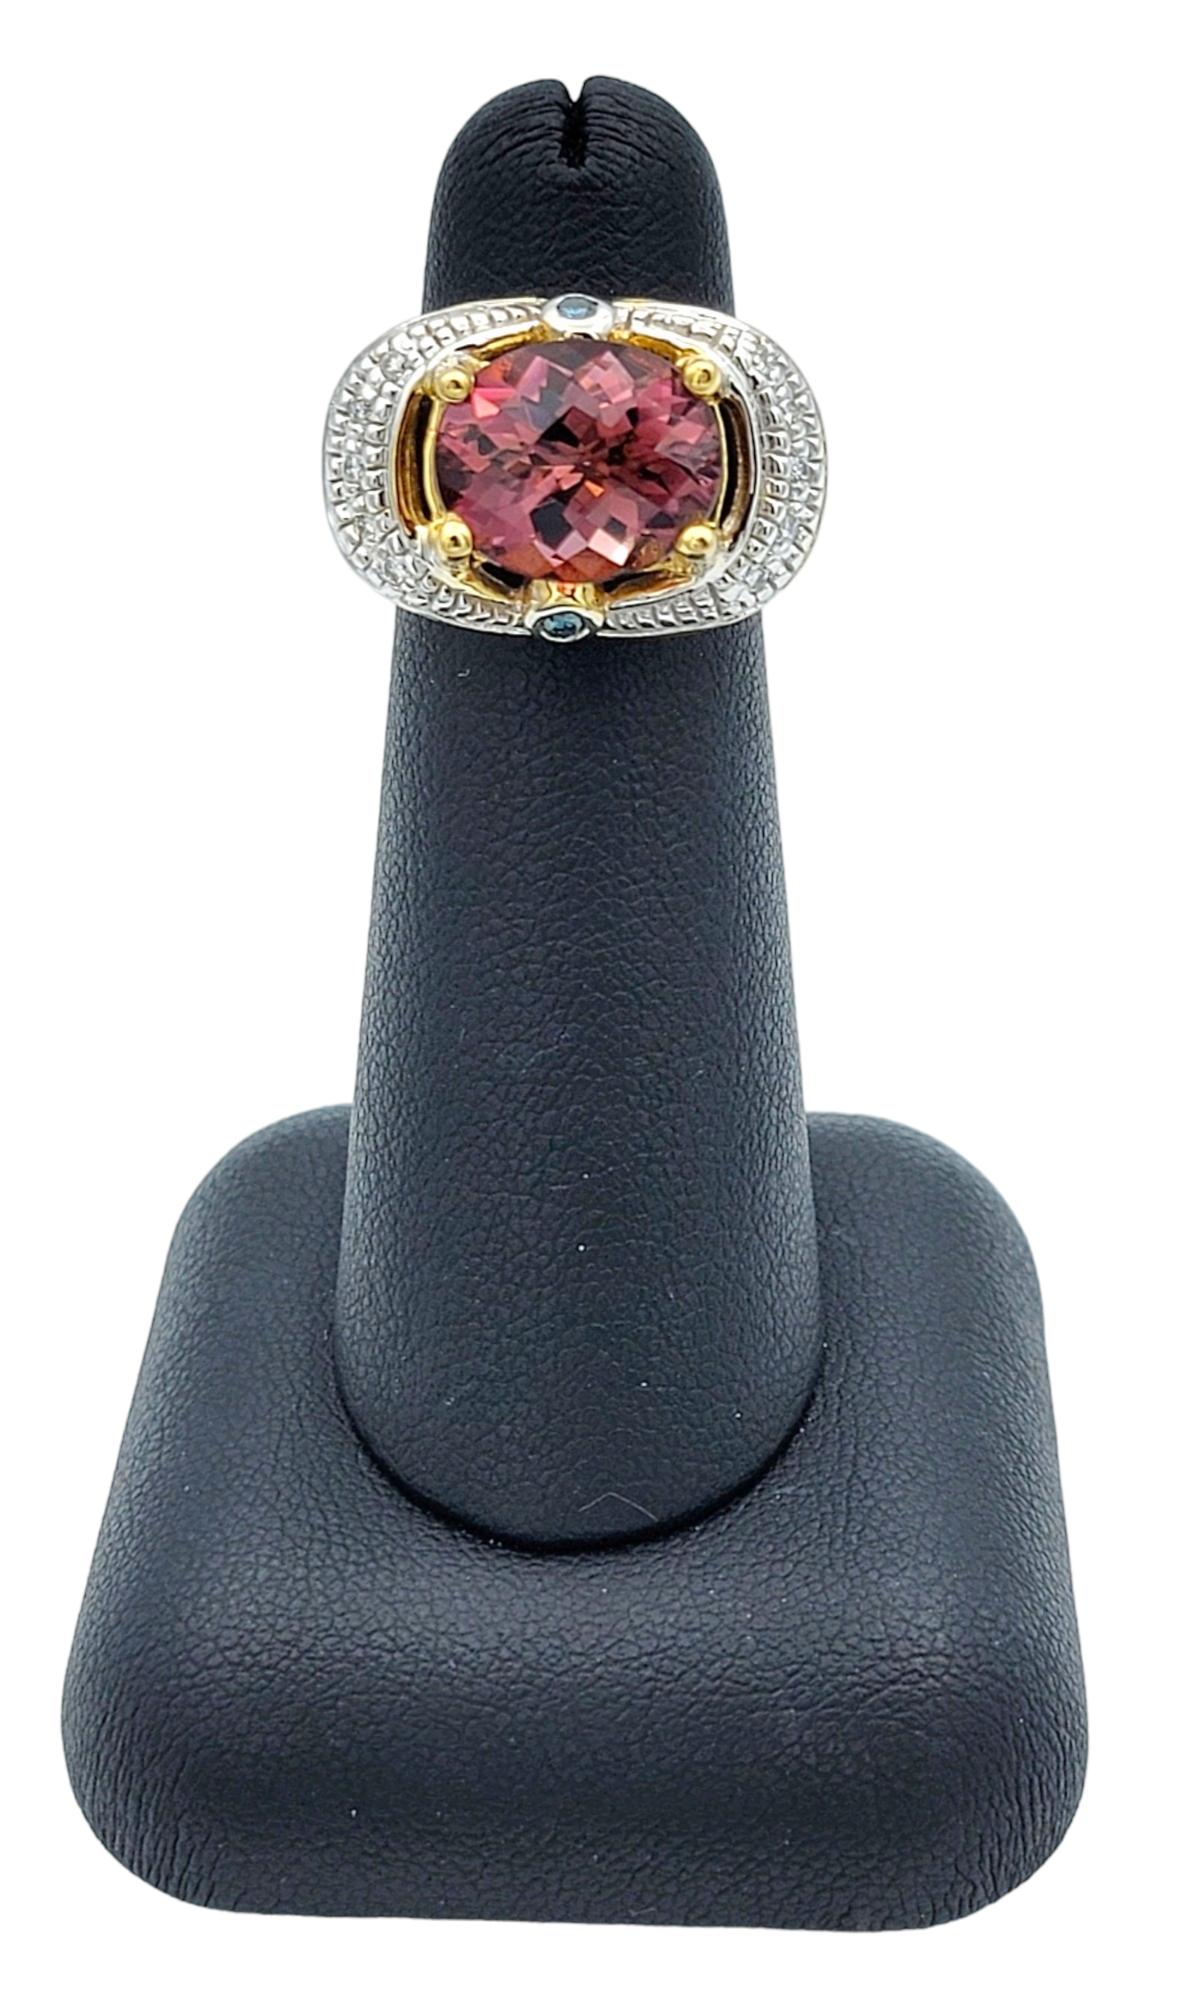 Oval Pink Tourmaline and Diamond Halo Ring Set in 14 Karat White and Yellow Gold For Sale 4